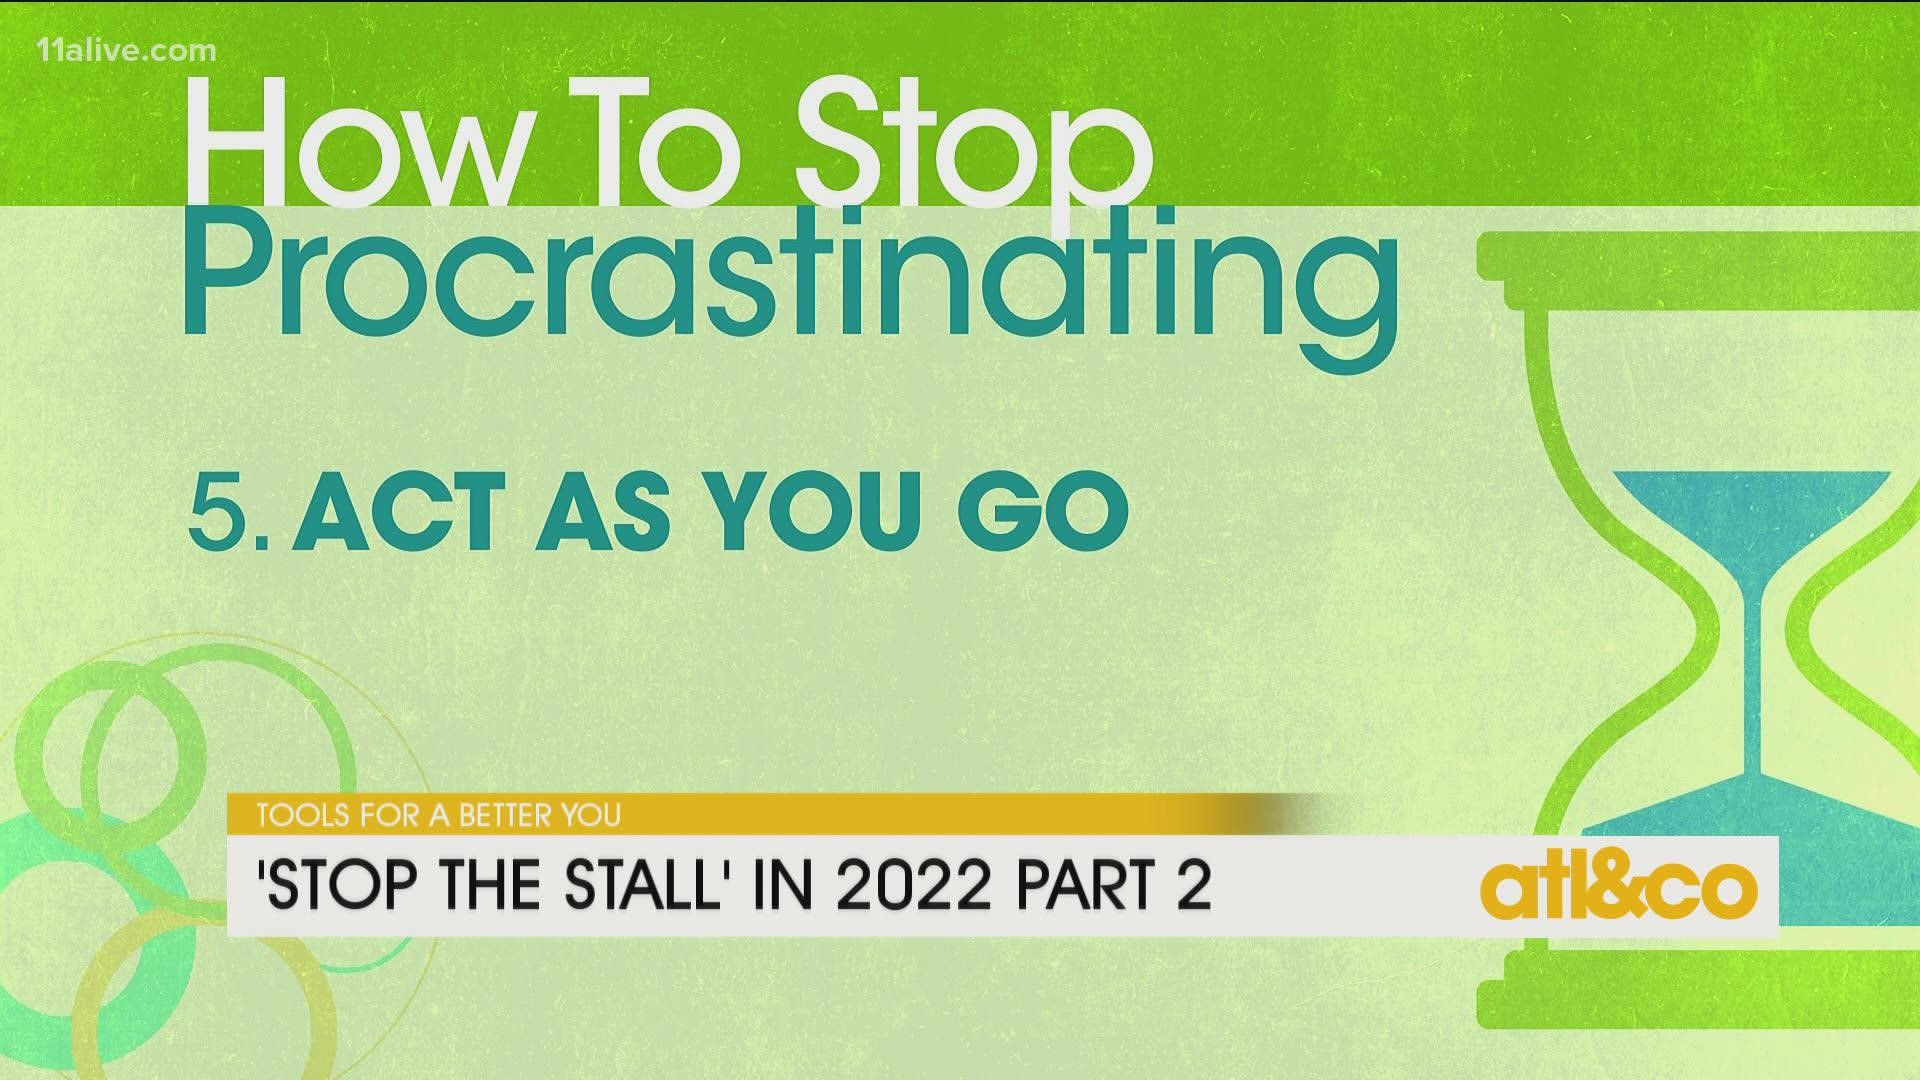 Stop procrastinating in 2022, achieve those goals, and be present in the moment.